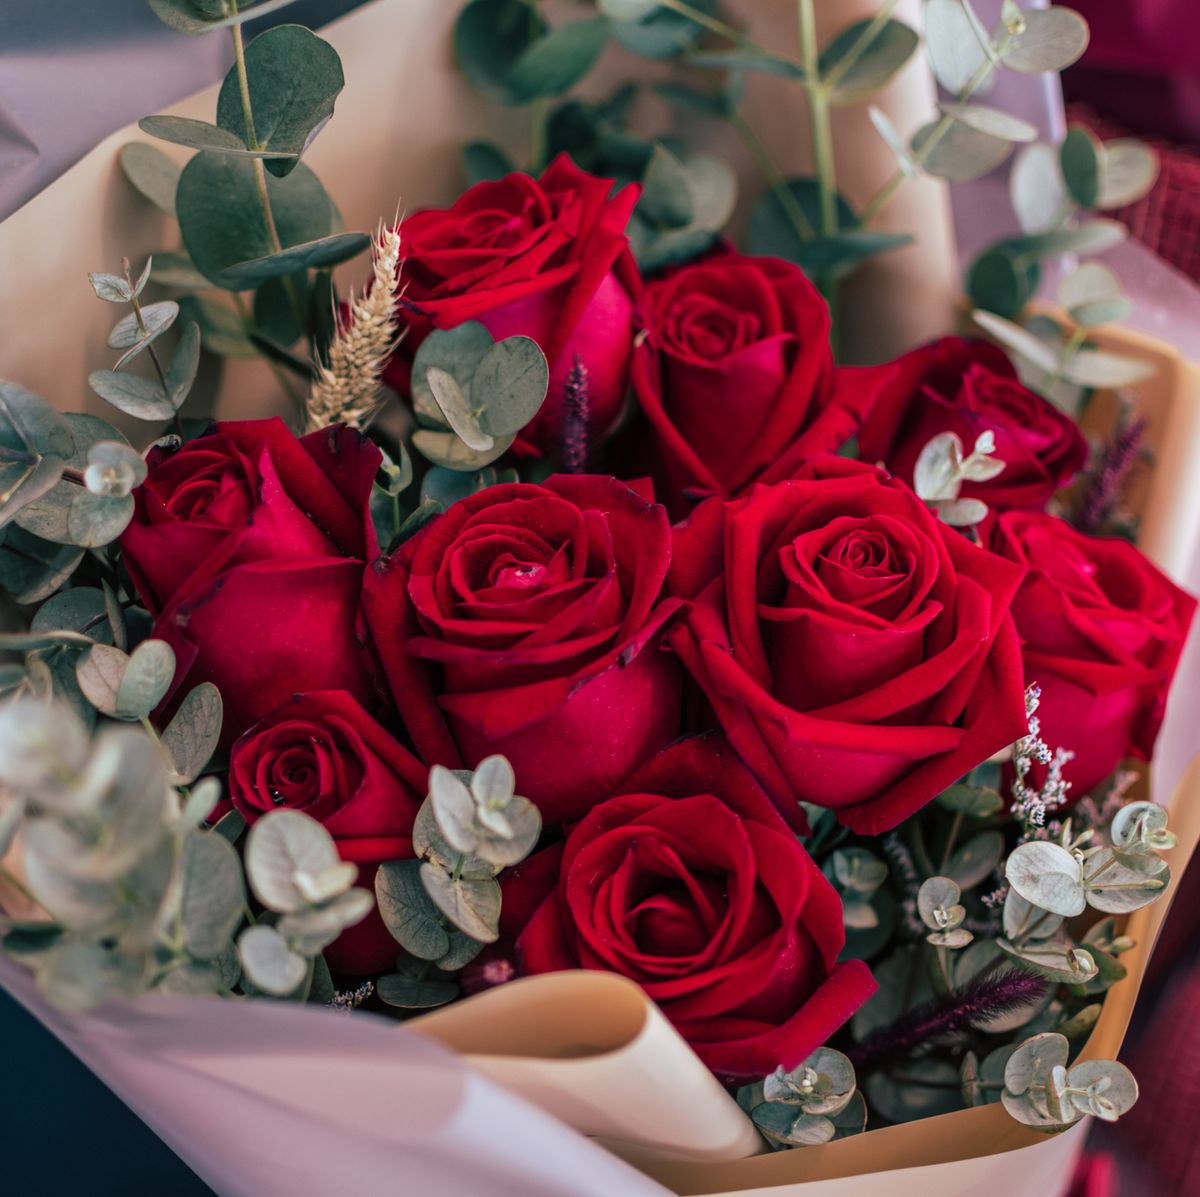 Deluxe Red Roses By Floraly - Send Fresher Flowers